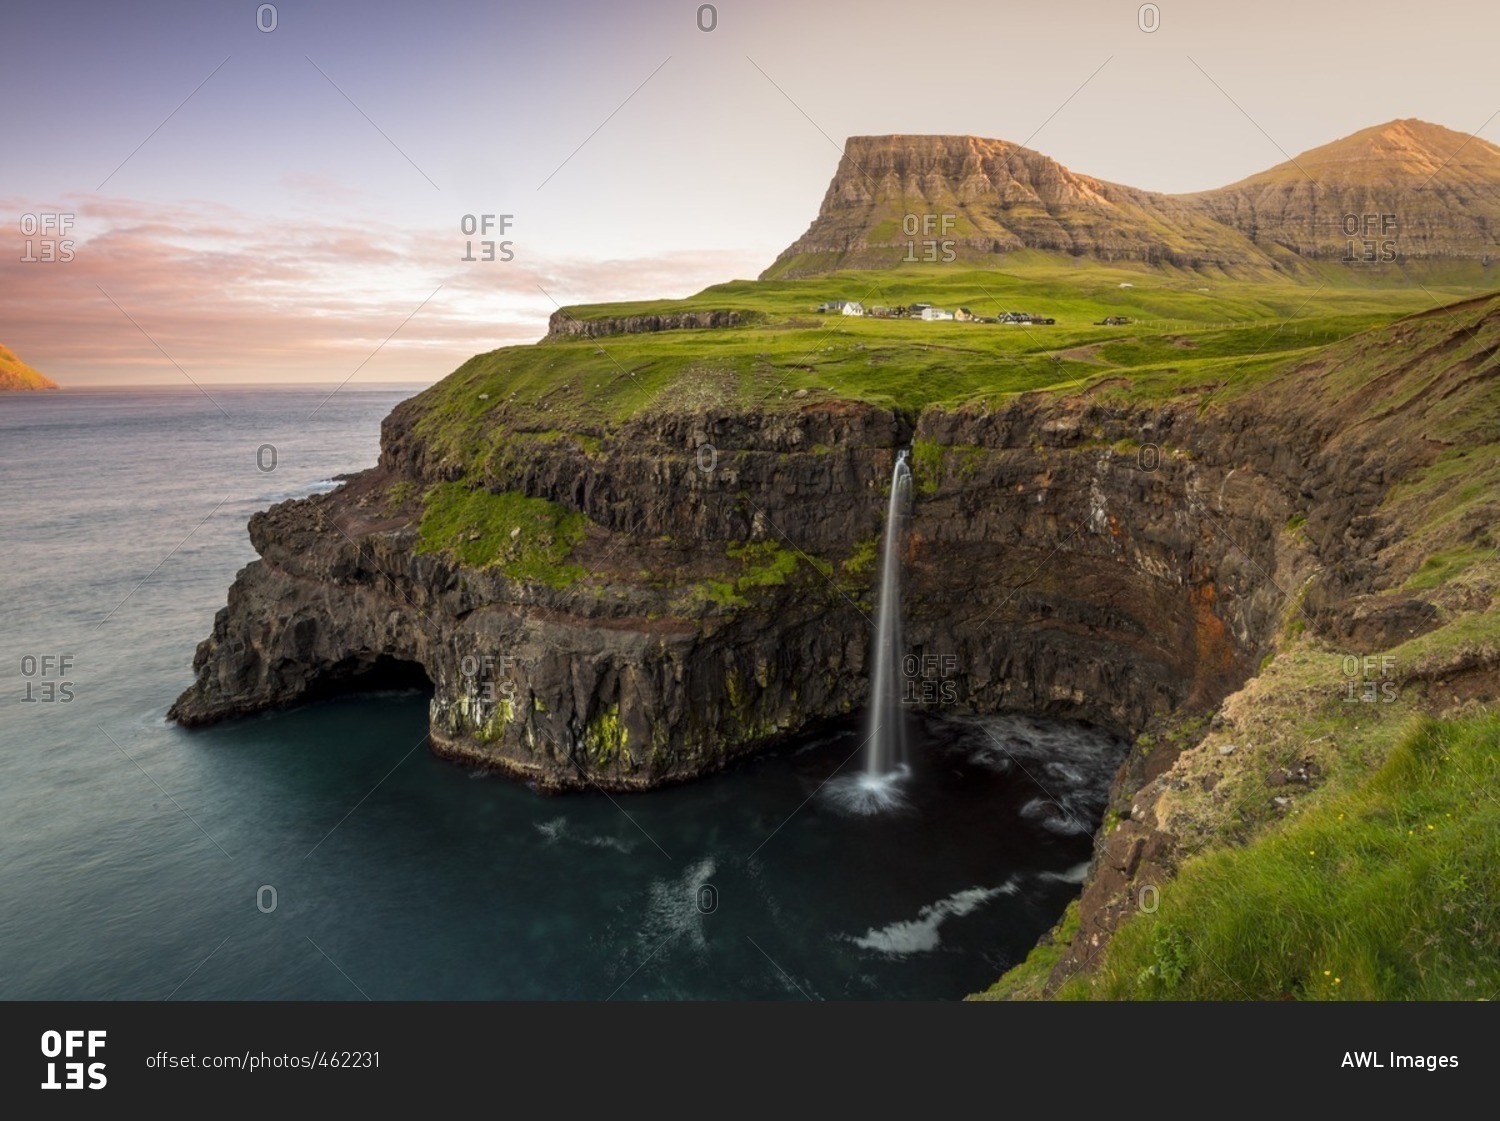 Gasadalur, Vagar island, Faroe Islands, Denmark. The iconic waterfall jumping from the cliff into the ocean.